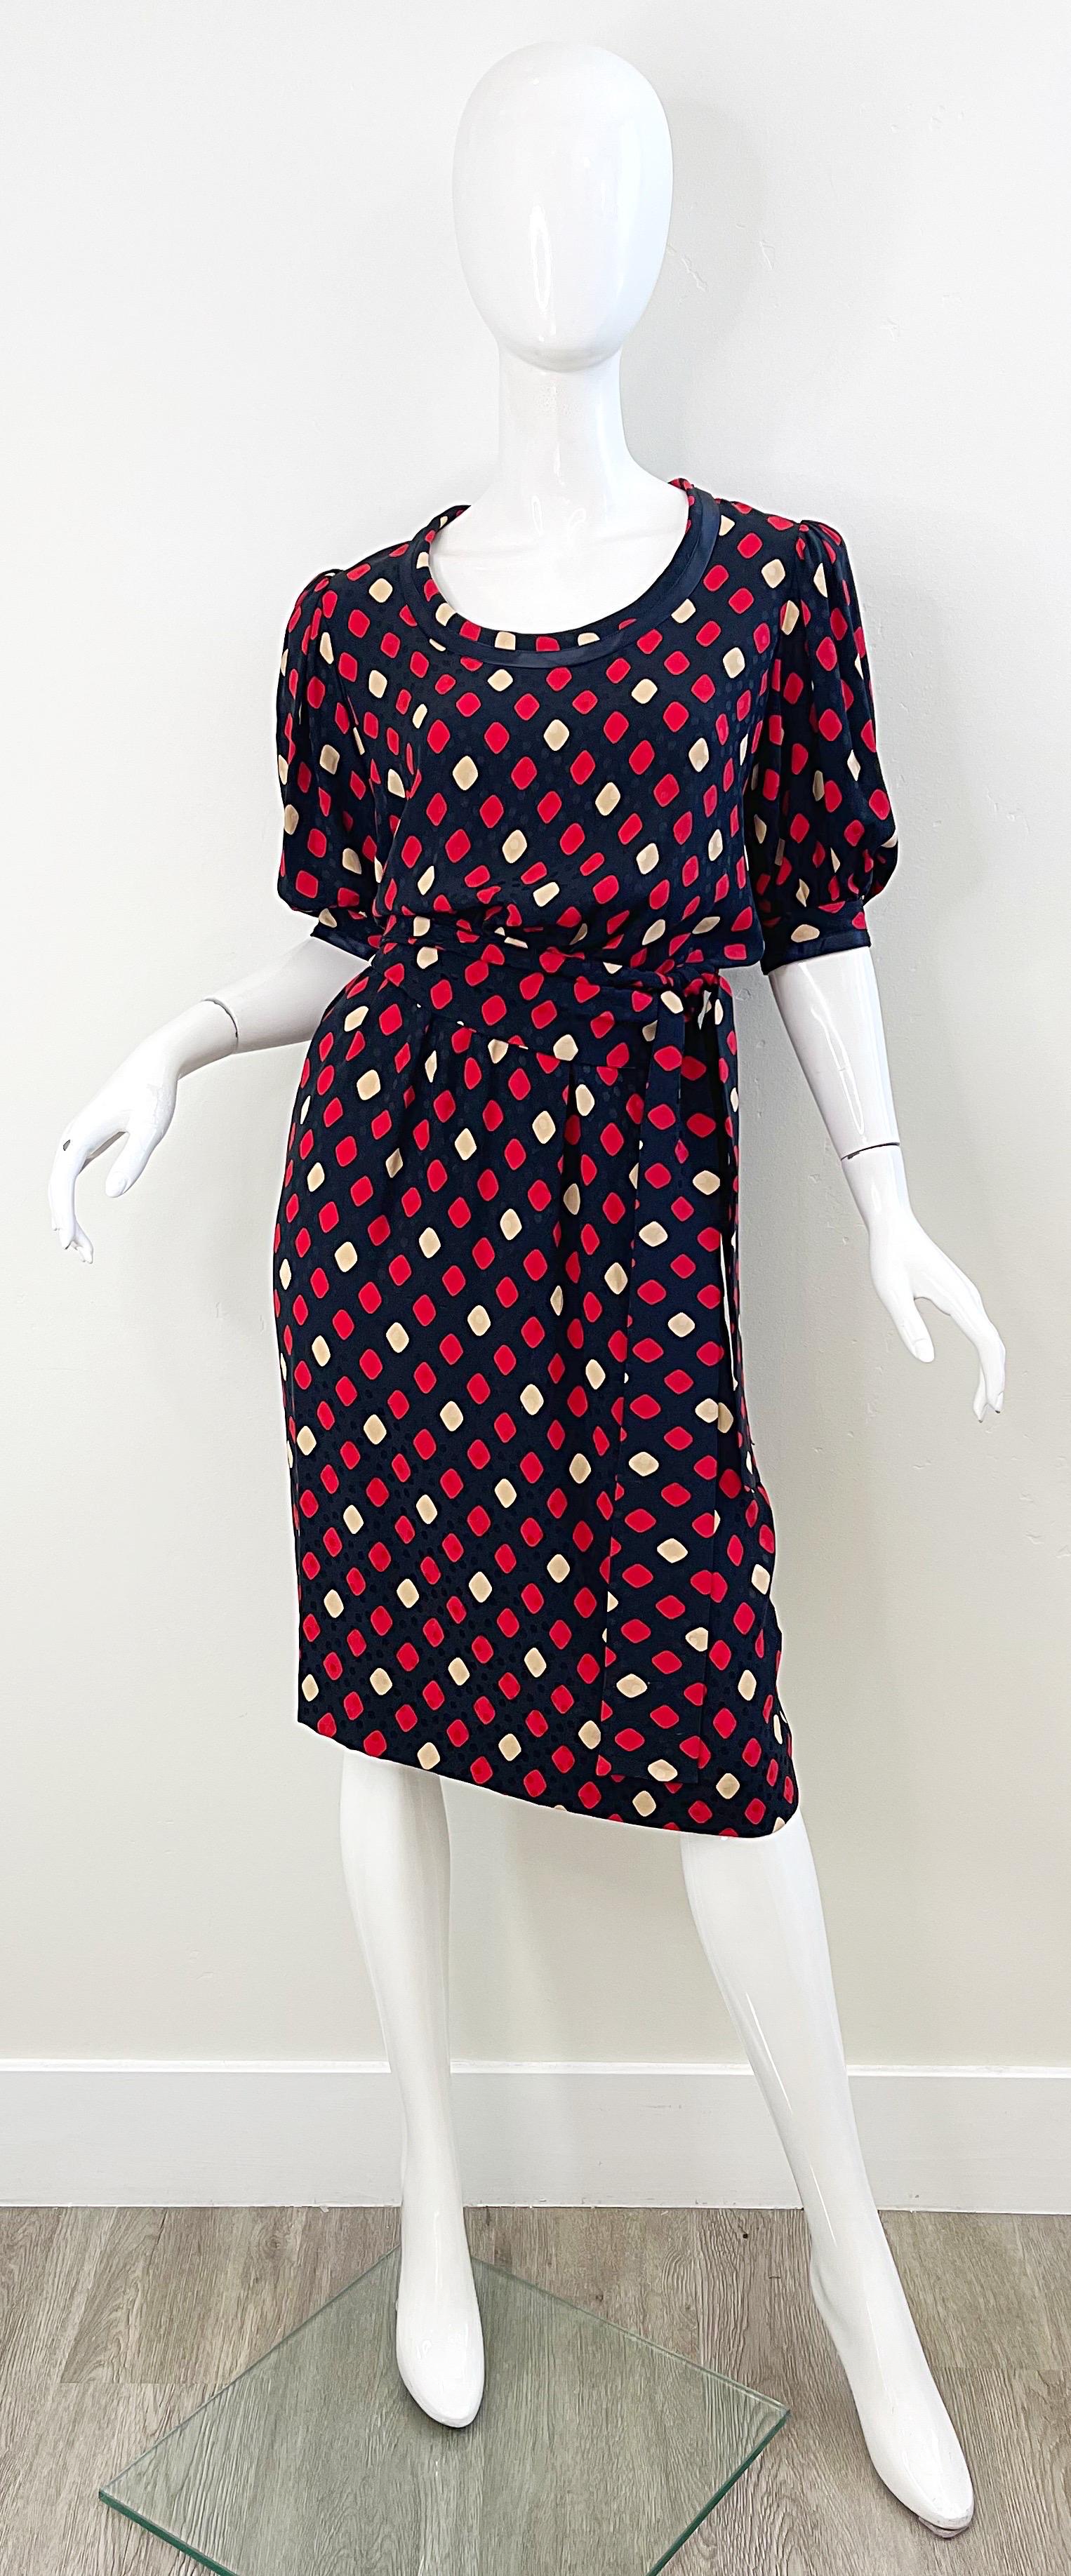 Yves Saint Laurent 1970s YSL Rive Gauche Black Red Diamond Print Silk 70s Dress  In Excellent Condition For Sale In San Diego, CA